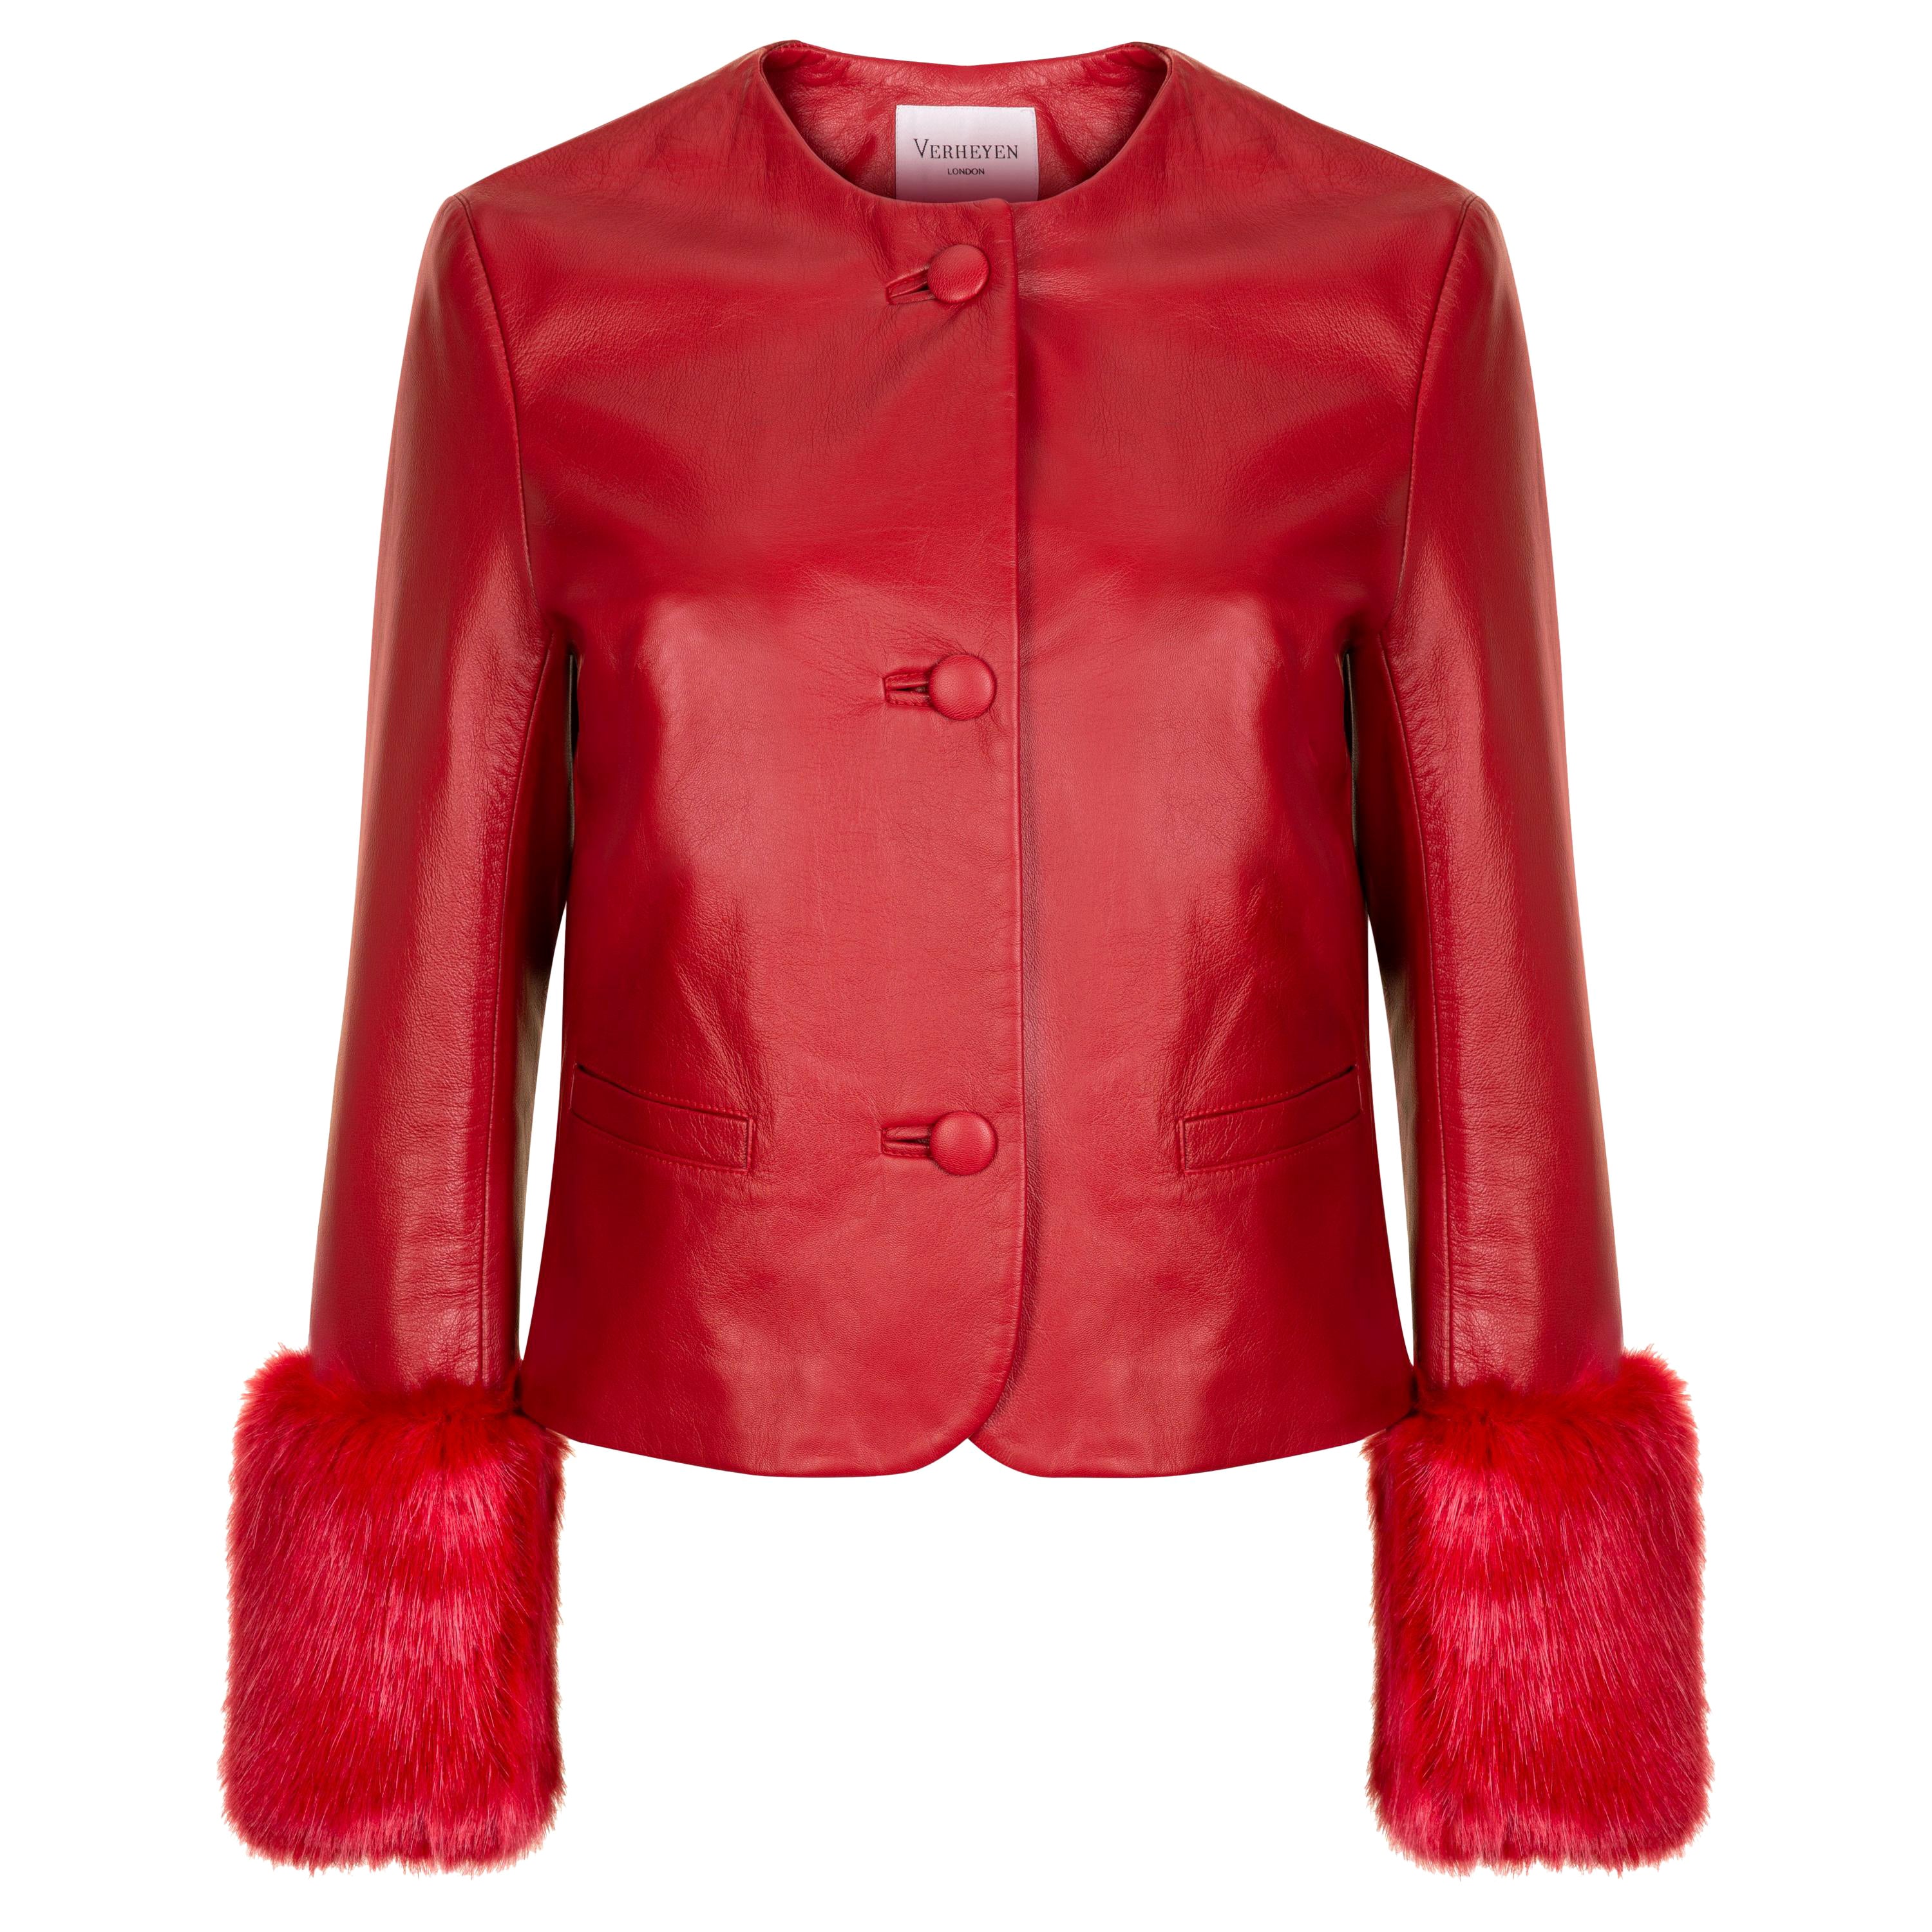 Verheyen Vita Cropped Jacket in Red Leather with Faux Fur - Size uk 12 For Sale